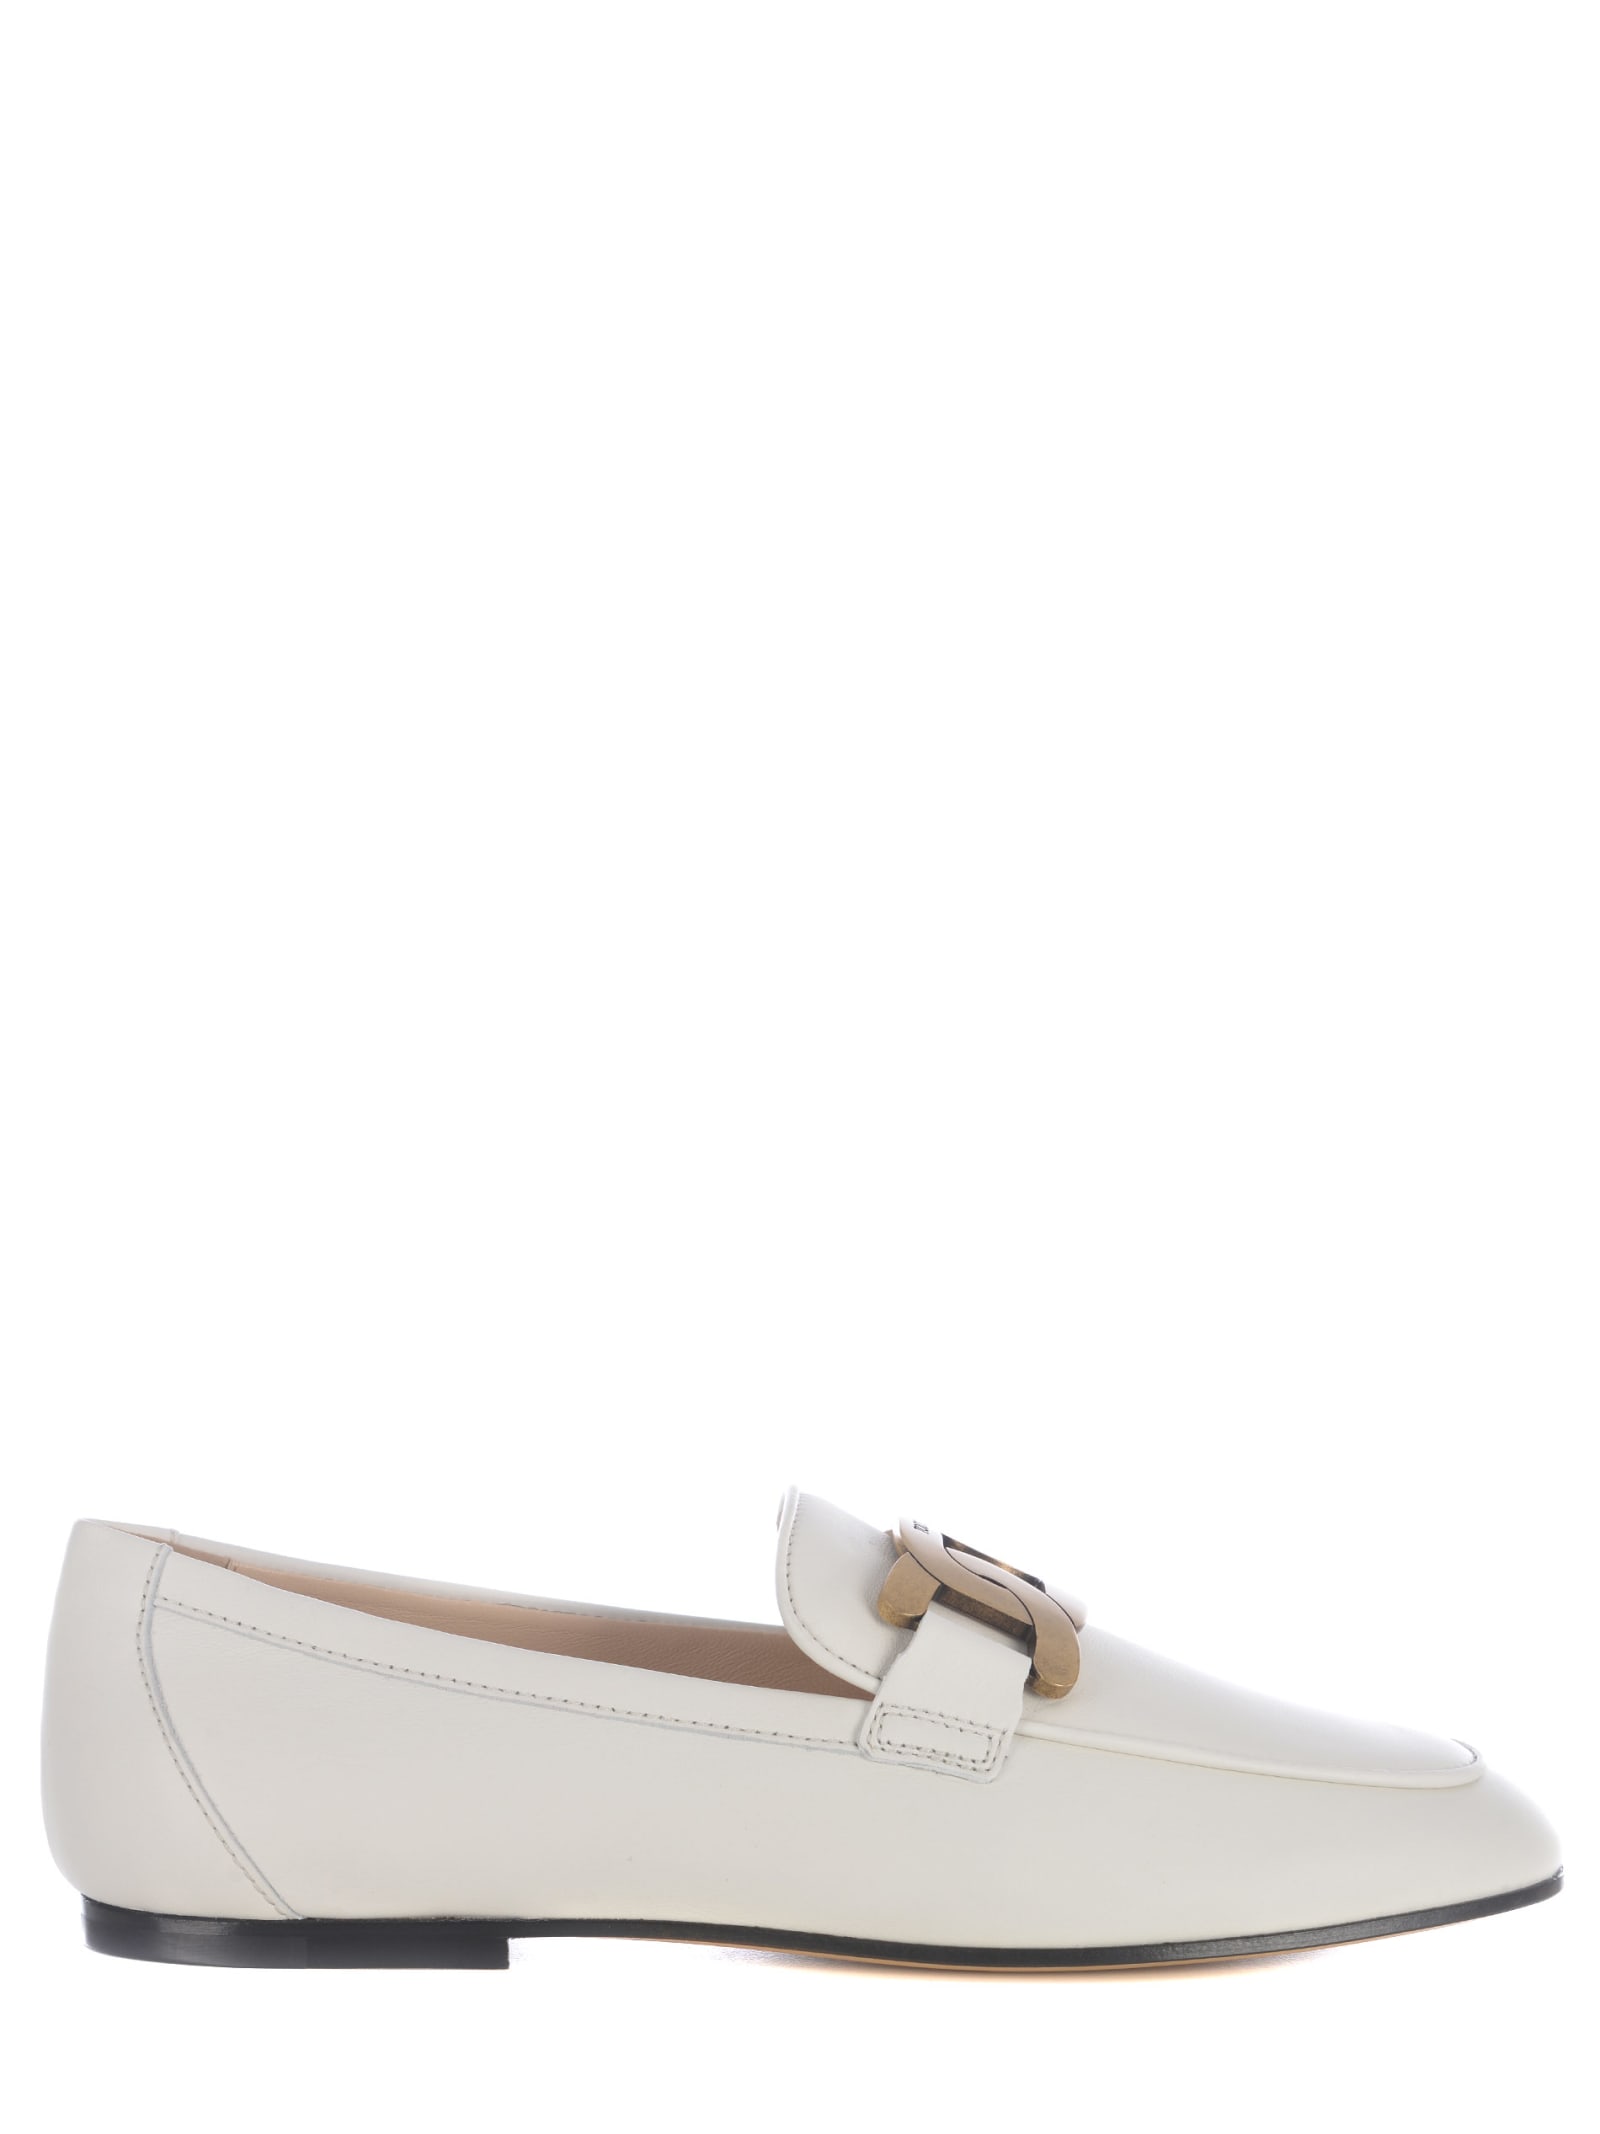 TOD'S MOCCASIN TODS KATE IN LEATHER